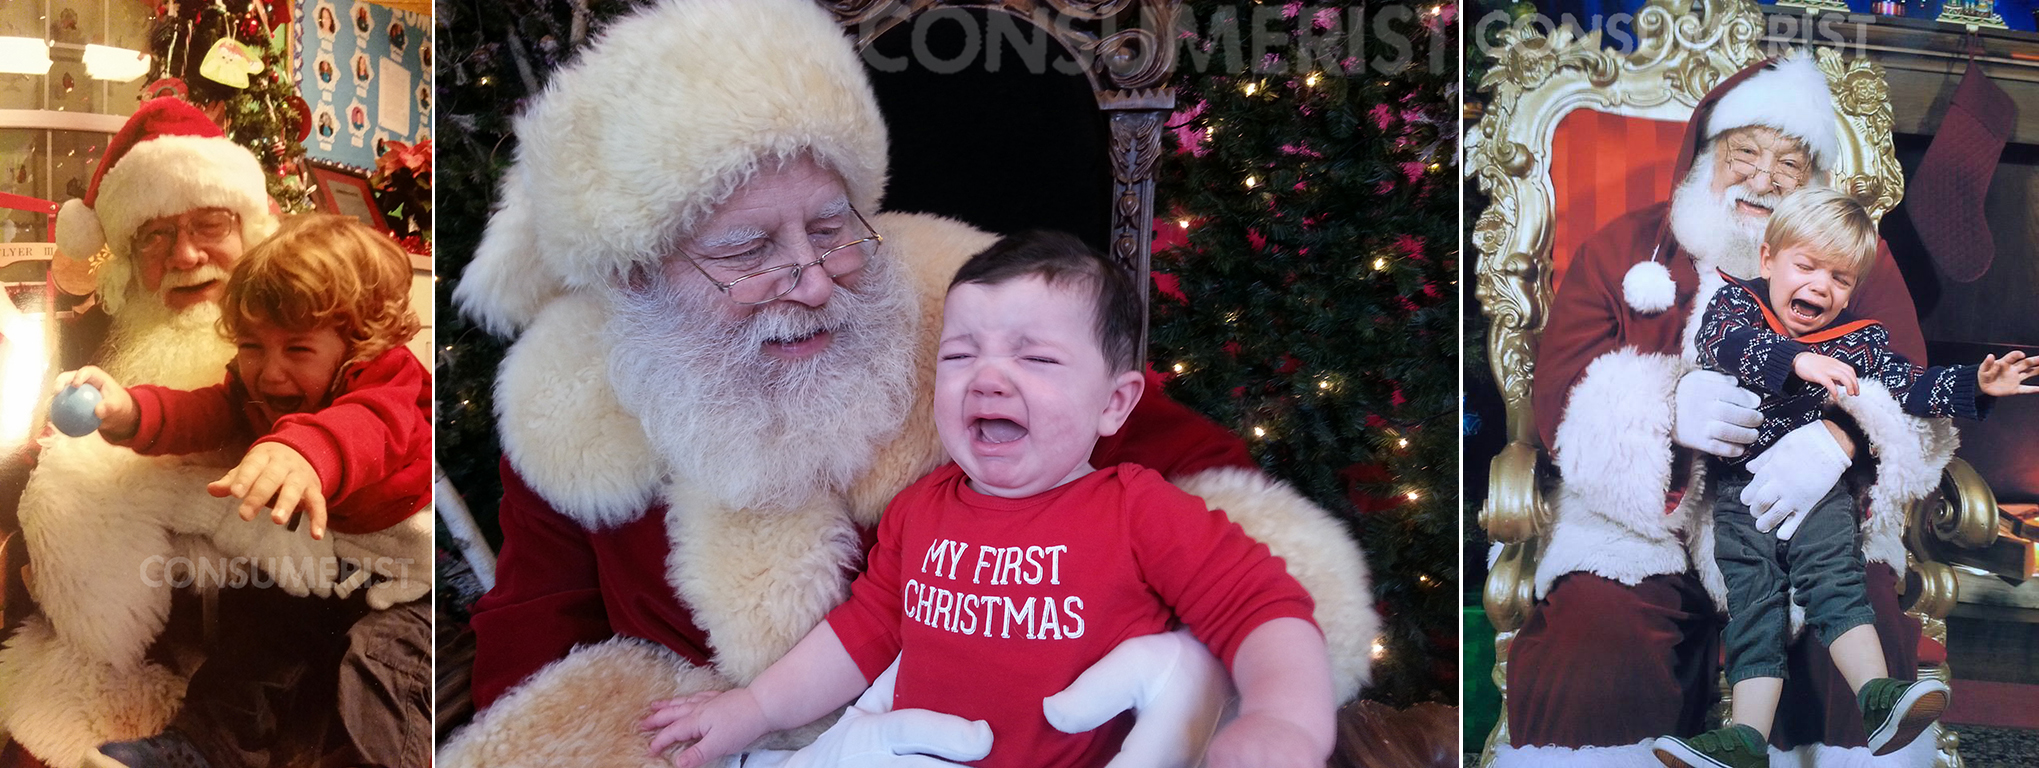 27 Photos Of Kids Who Are Totally Ticked Their Parents Made Them Hang Out With This Weird Santa Guy